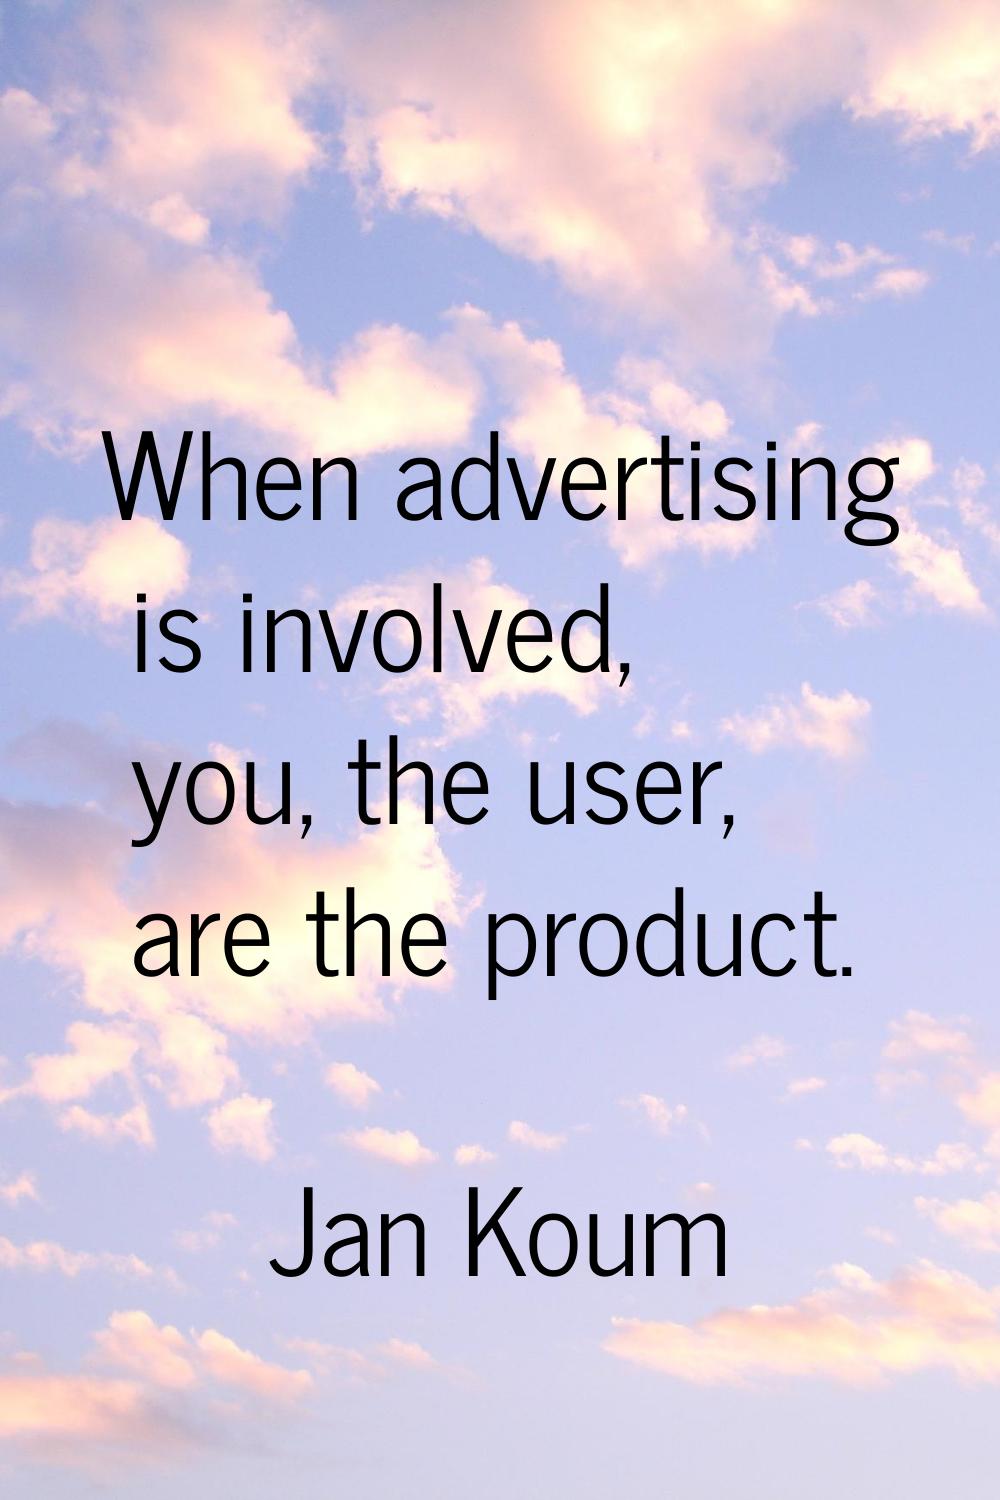 When advertising is involved, you, the user, are the product.